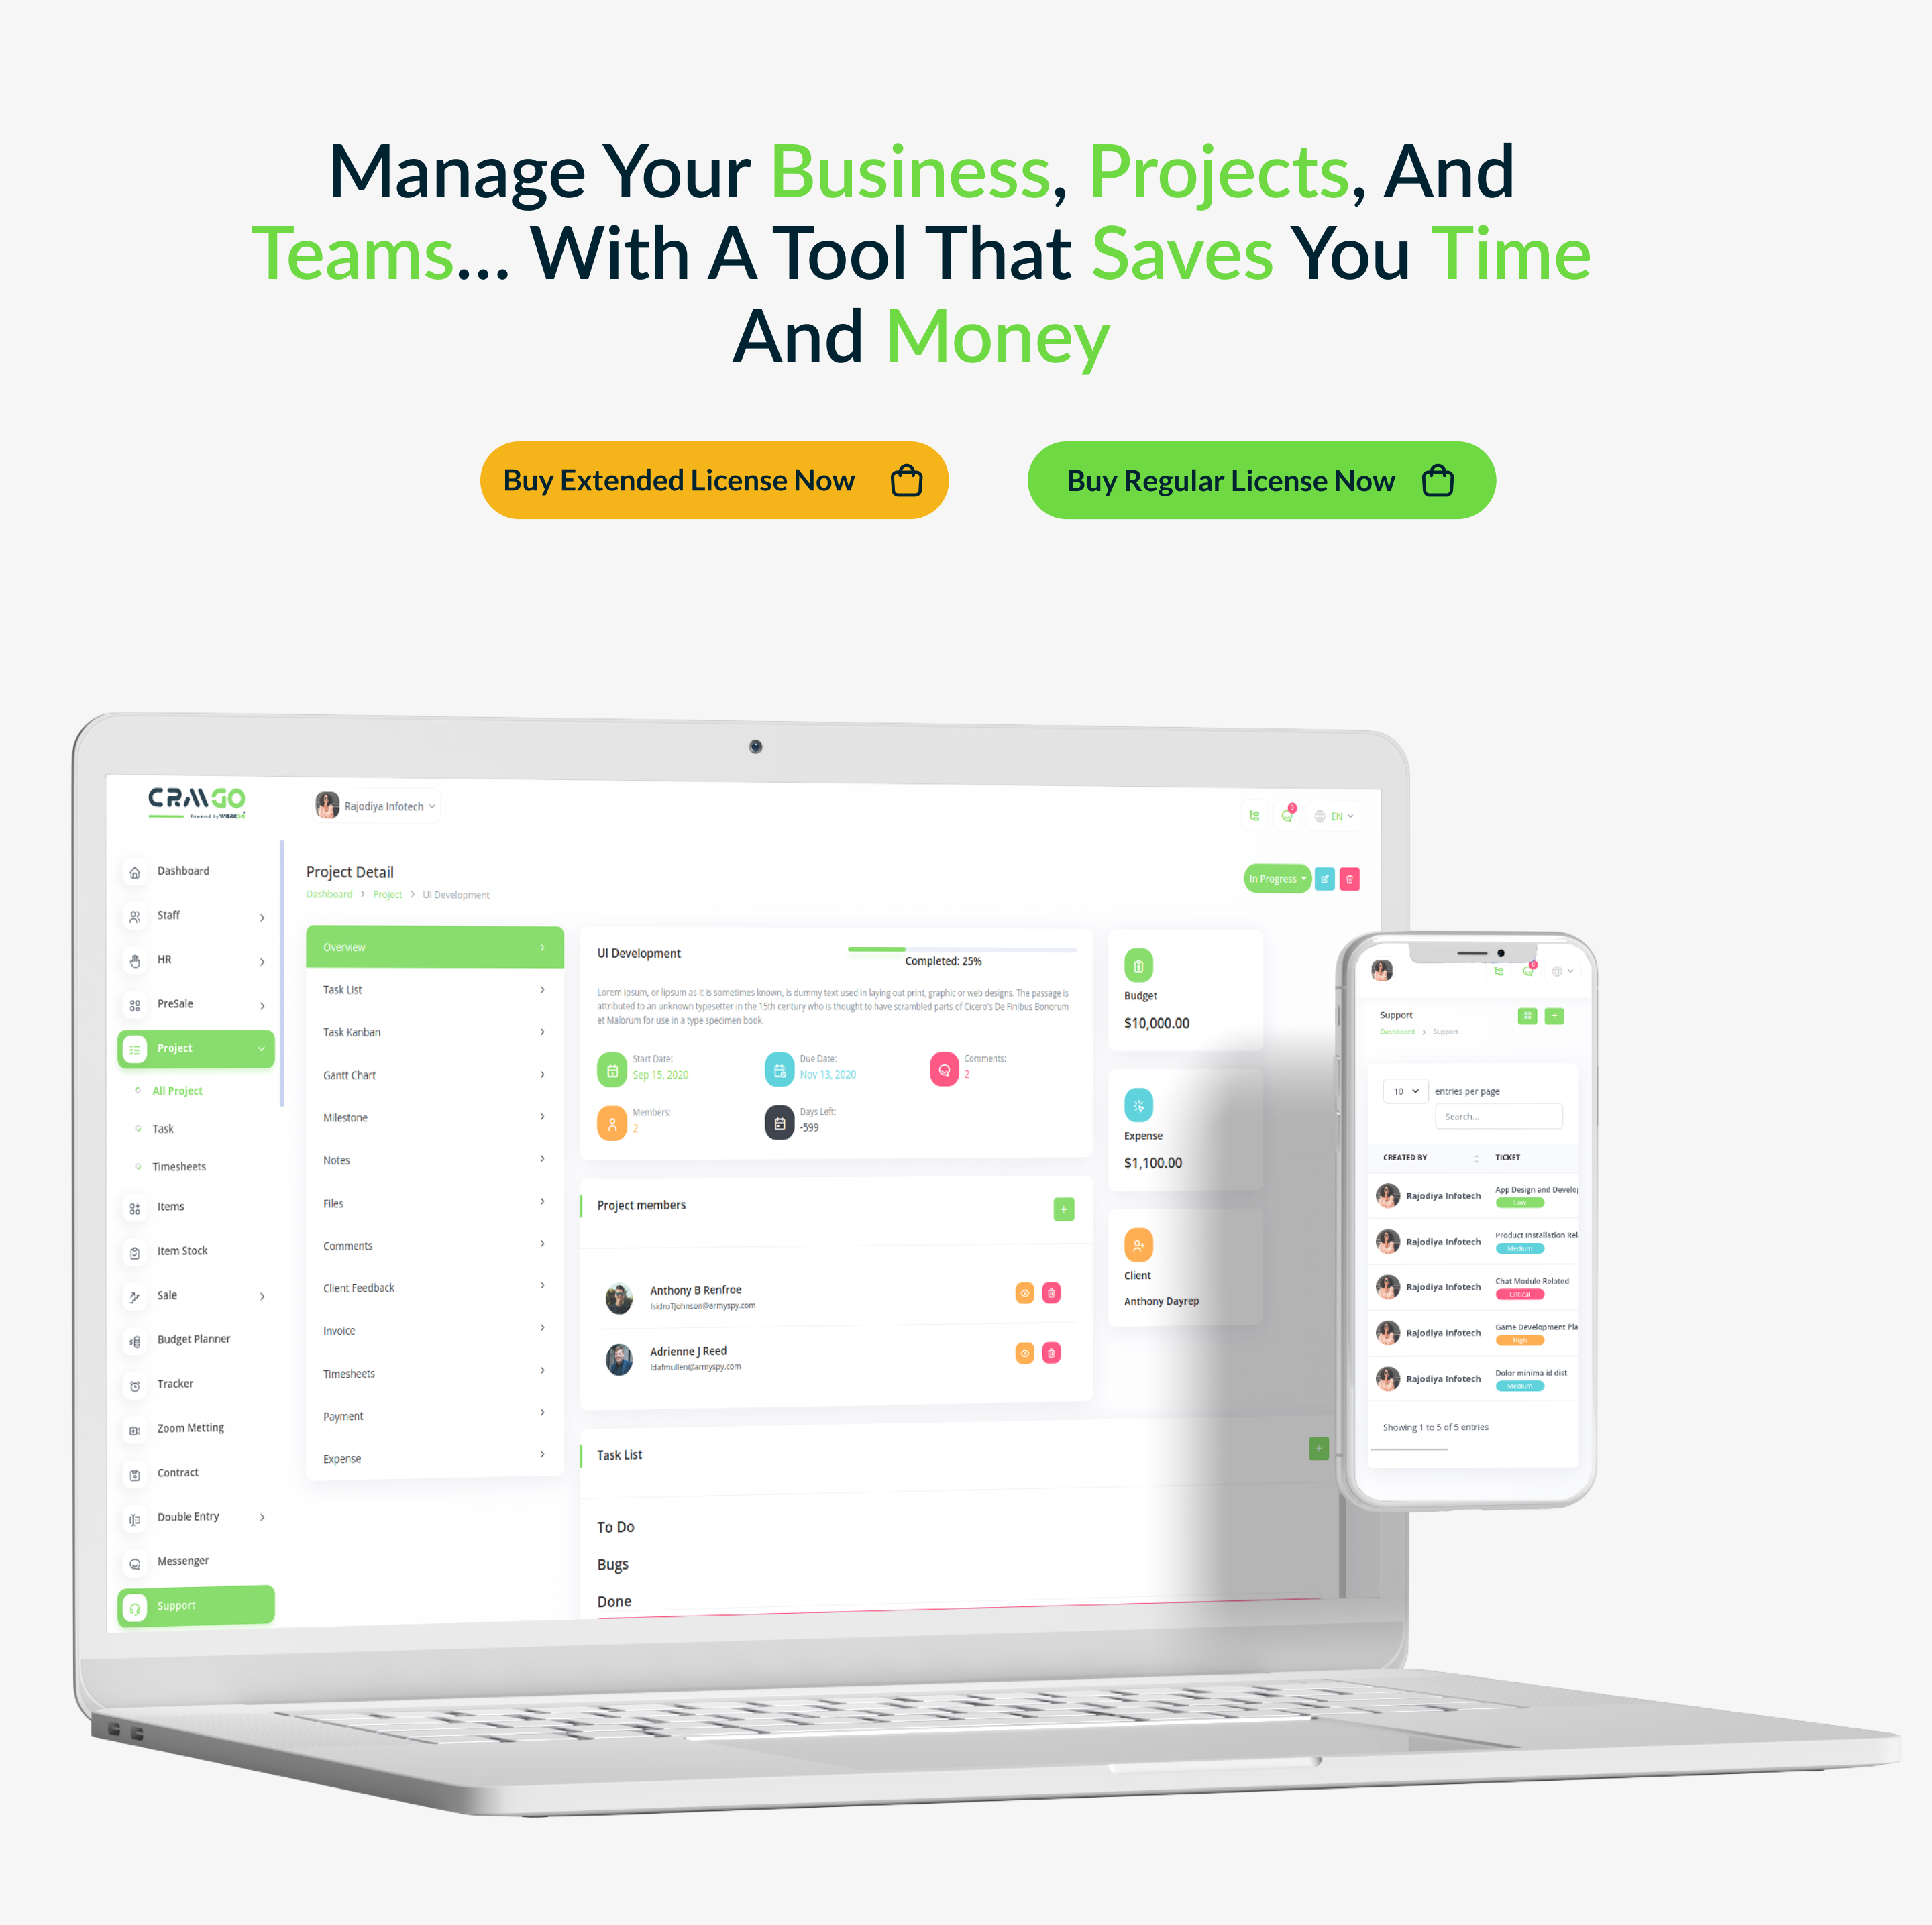 CRMGo SaaS - Projects, Accounting, Leads, Deals & HRM Tool - 6